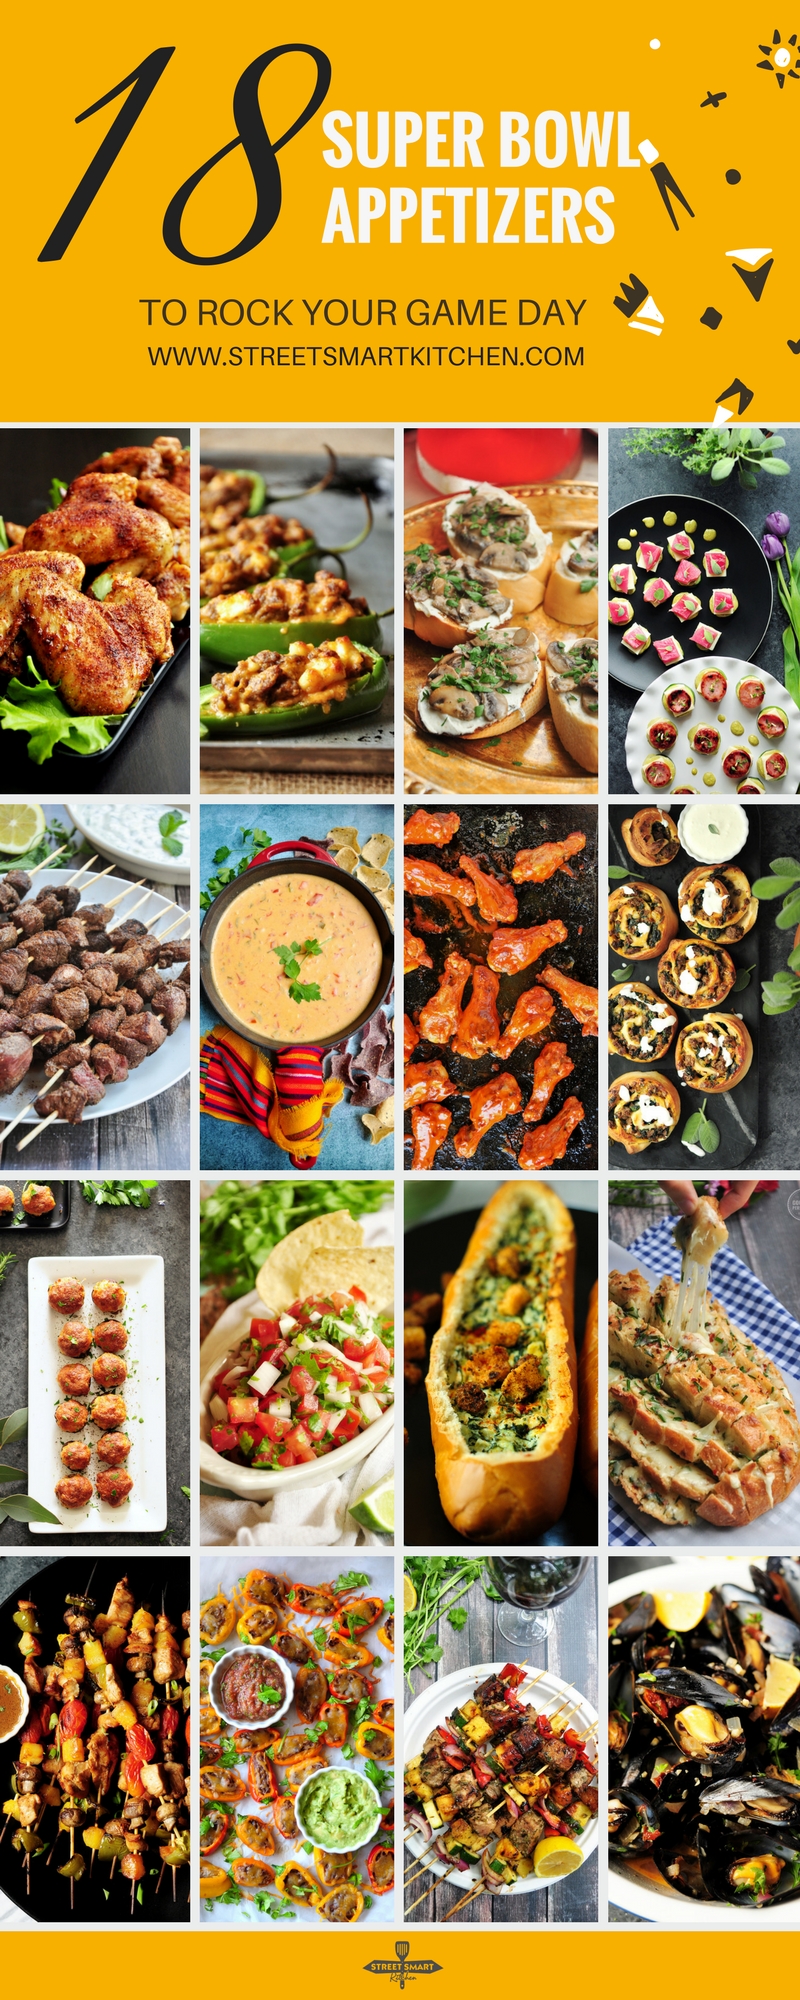 Everyone wants to devour single-bite Super Bowl appetizers while they watch the big game. These awesome recipes will get your guests just as excited about the food as the football.